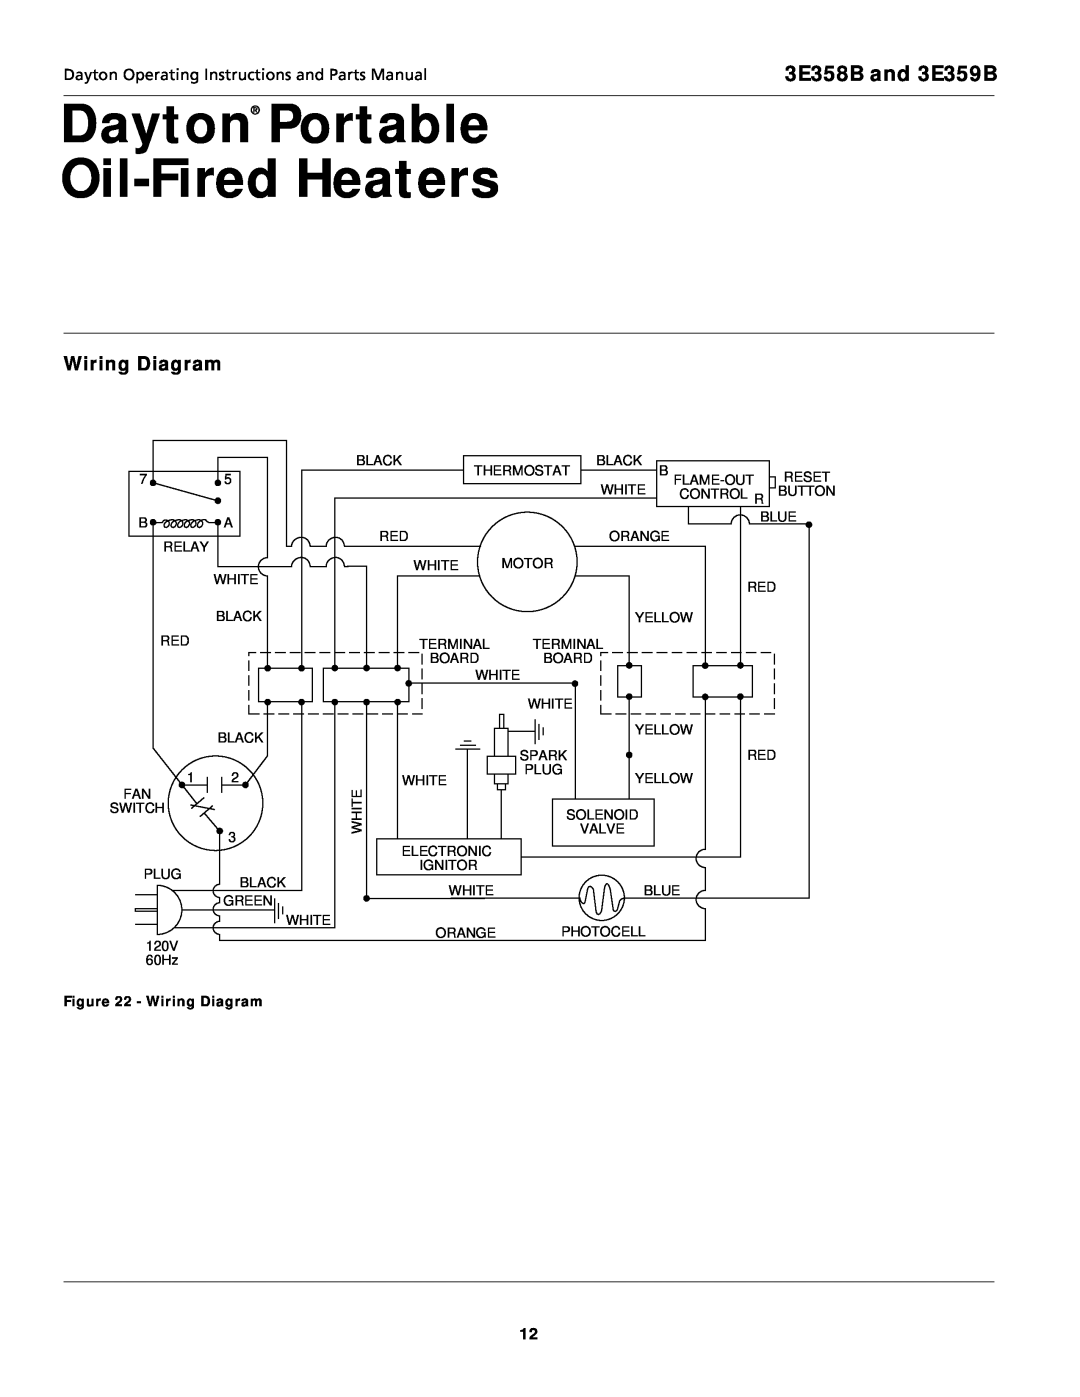 Dayton specifications Dayton Portable Oil-FiredHeaters, 3E358B and 3E359B, Wiring Diagram 